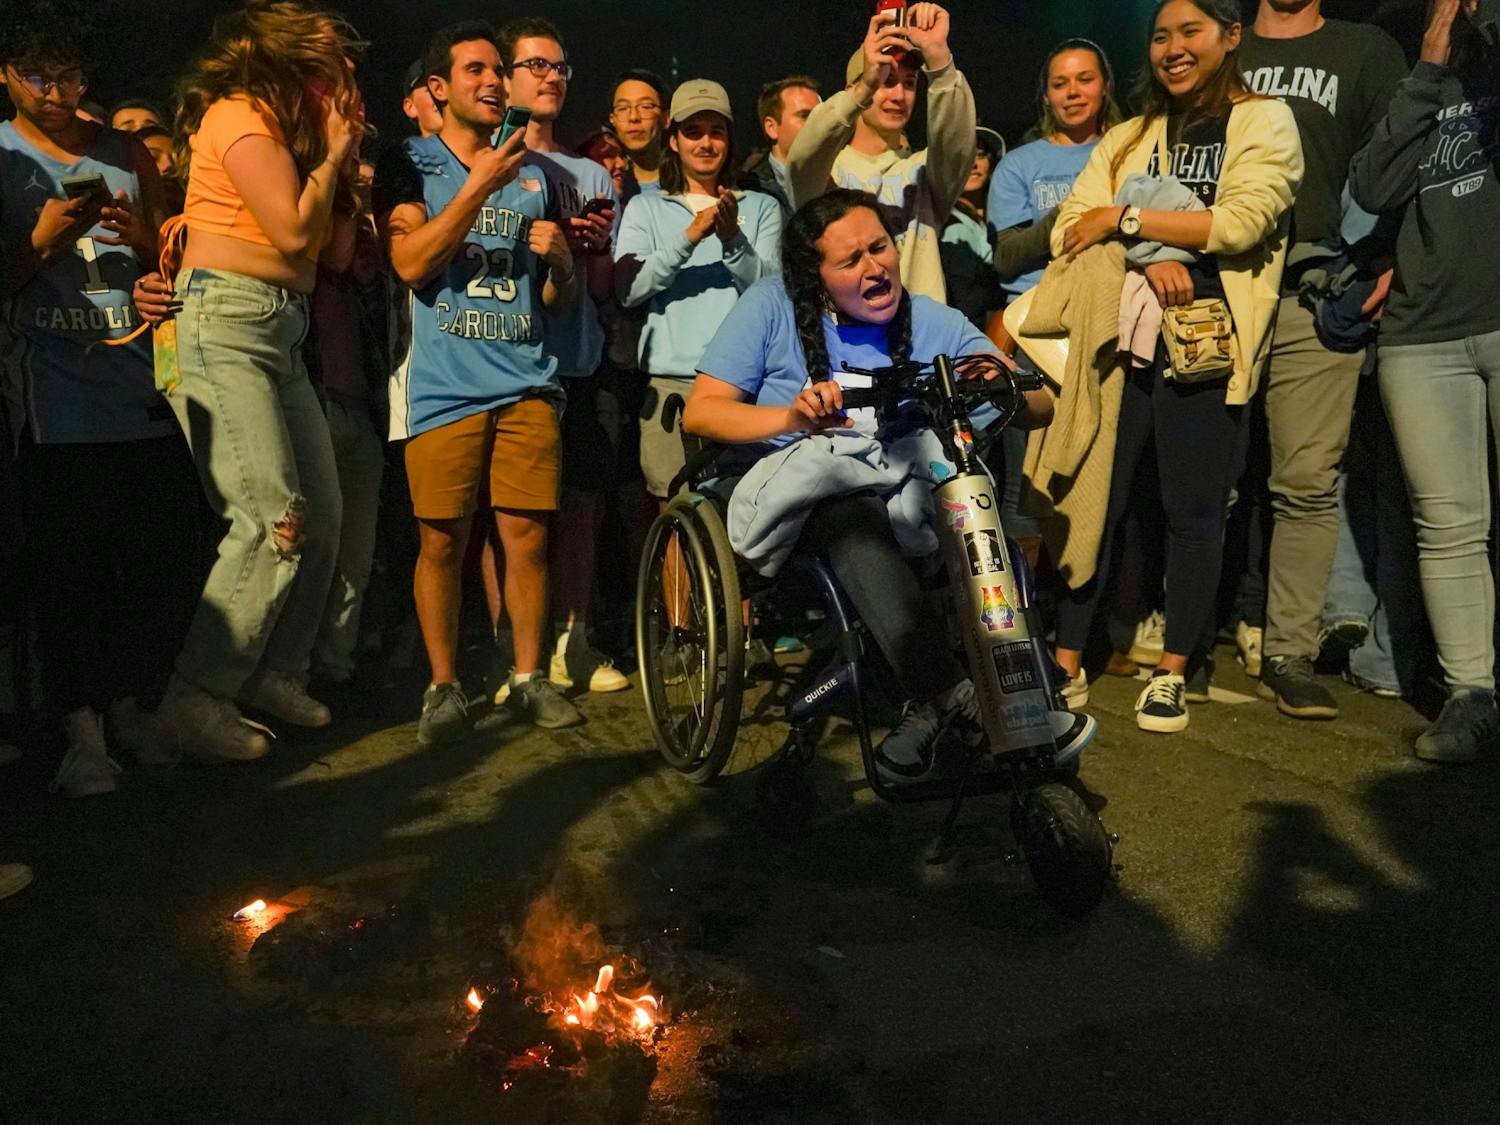 UNC fans celebrate their team's defeat of Duke on Franklin Street during the 2022 Final Four matchup on April 3, 2022. UNC beat Duke 81-77. Photo courtesy of Morgan Pirozzi.